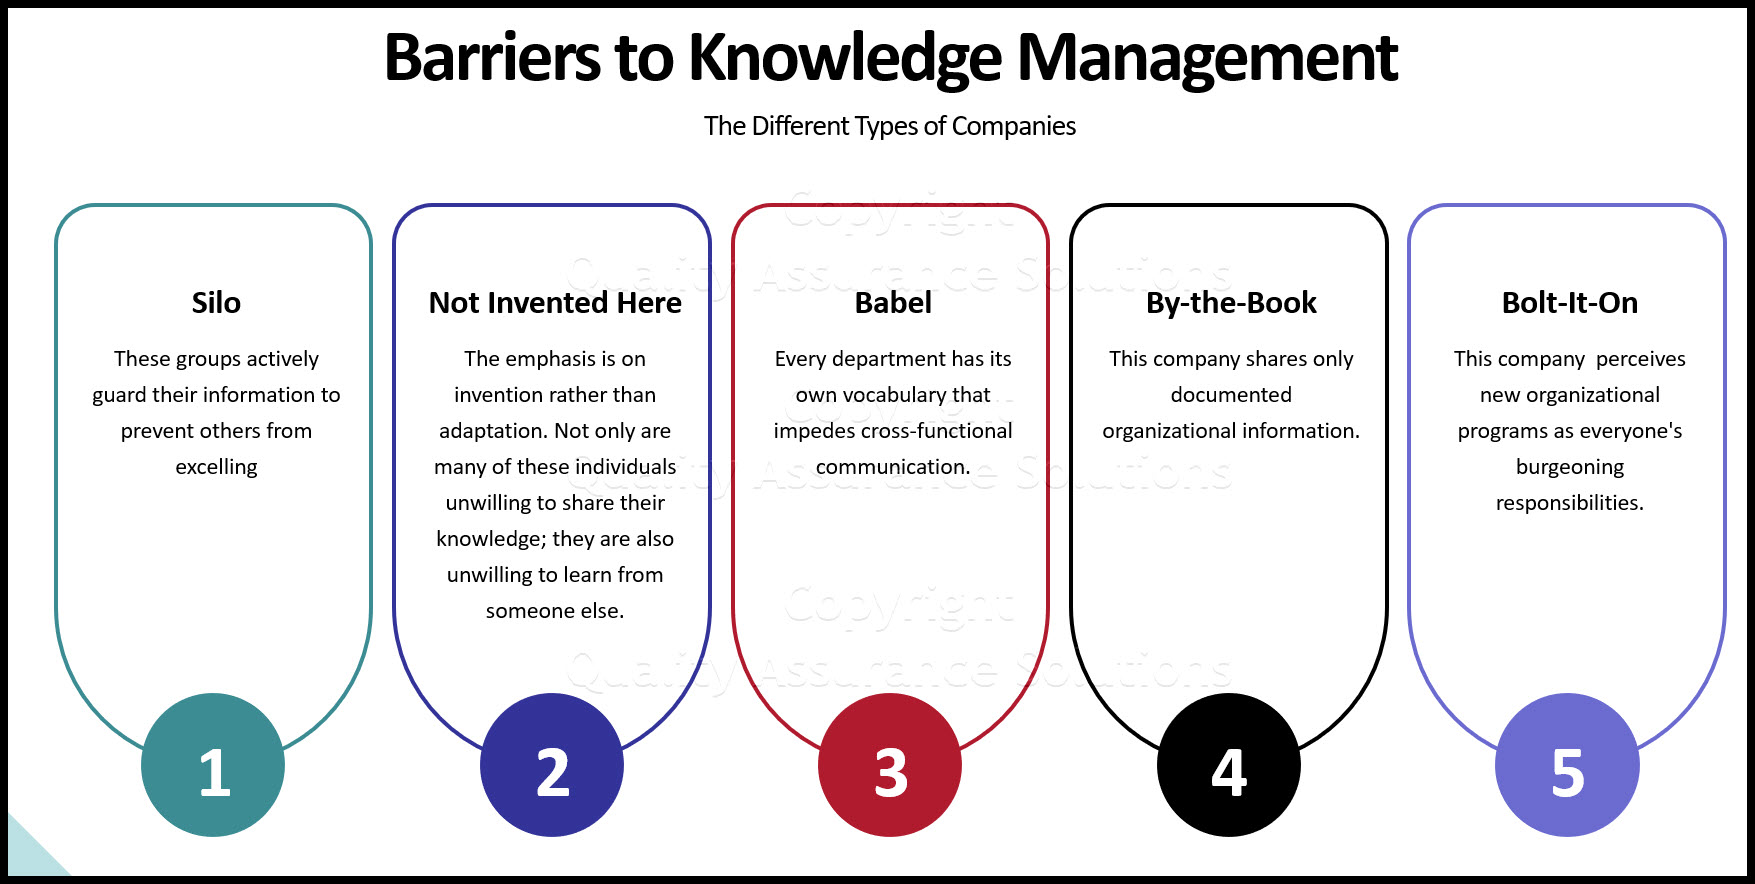 Knowledge Management (KM) is the activity of expanding, storing, and retrieving intellectual capital.